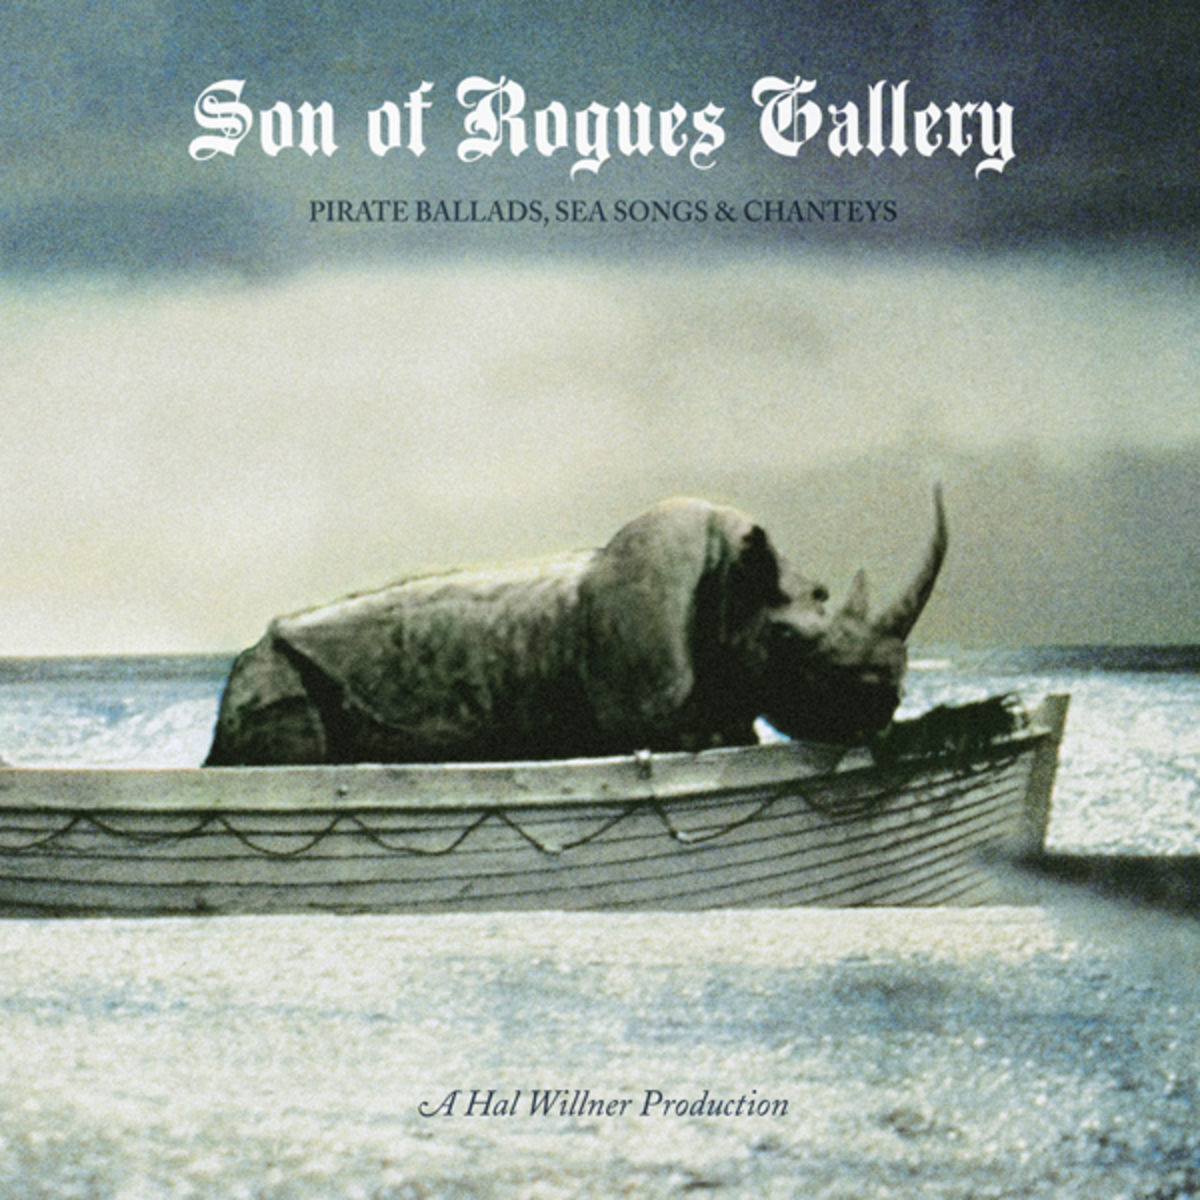 V.A. Son Of Rogues Gallery - 2013 - Pirate Ballads, Sea Songs & Chanteys